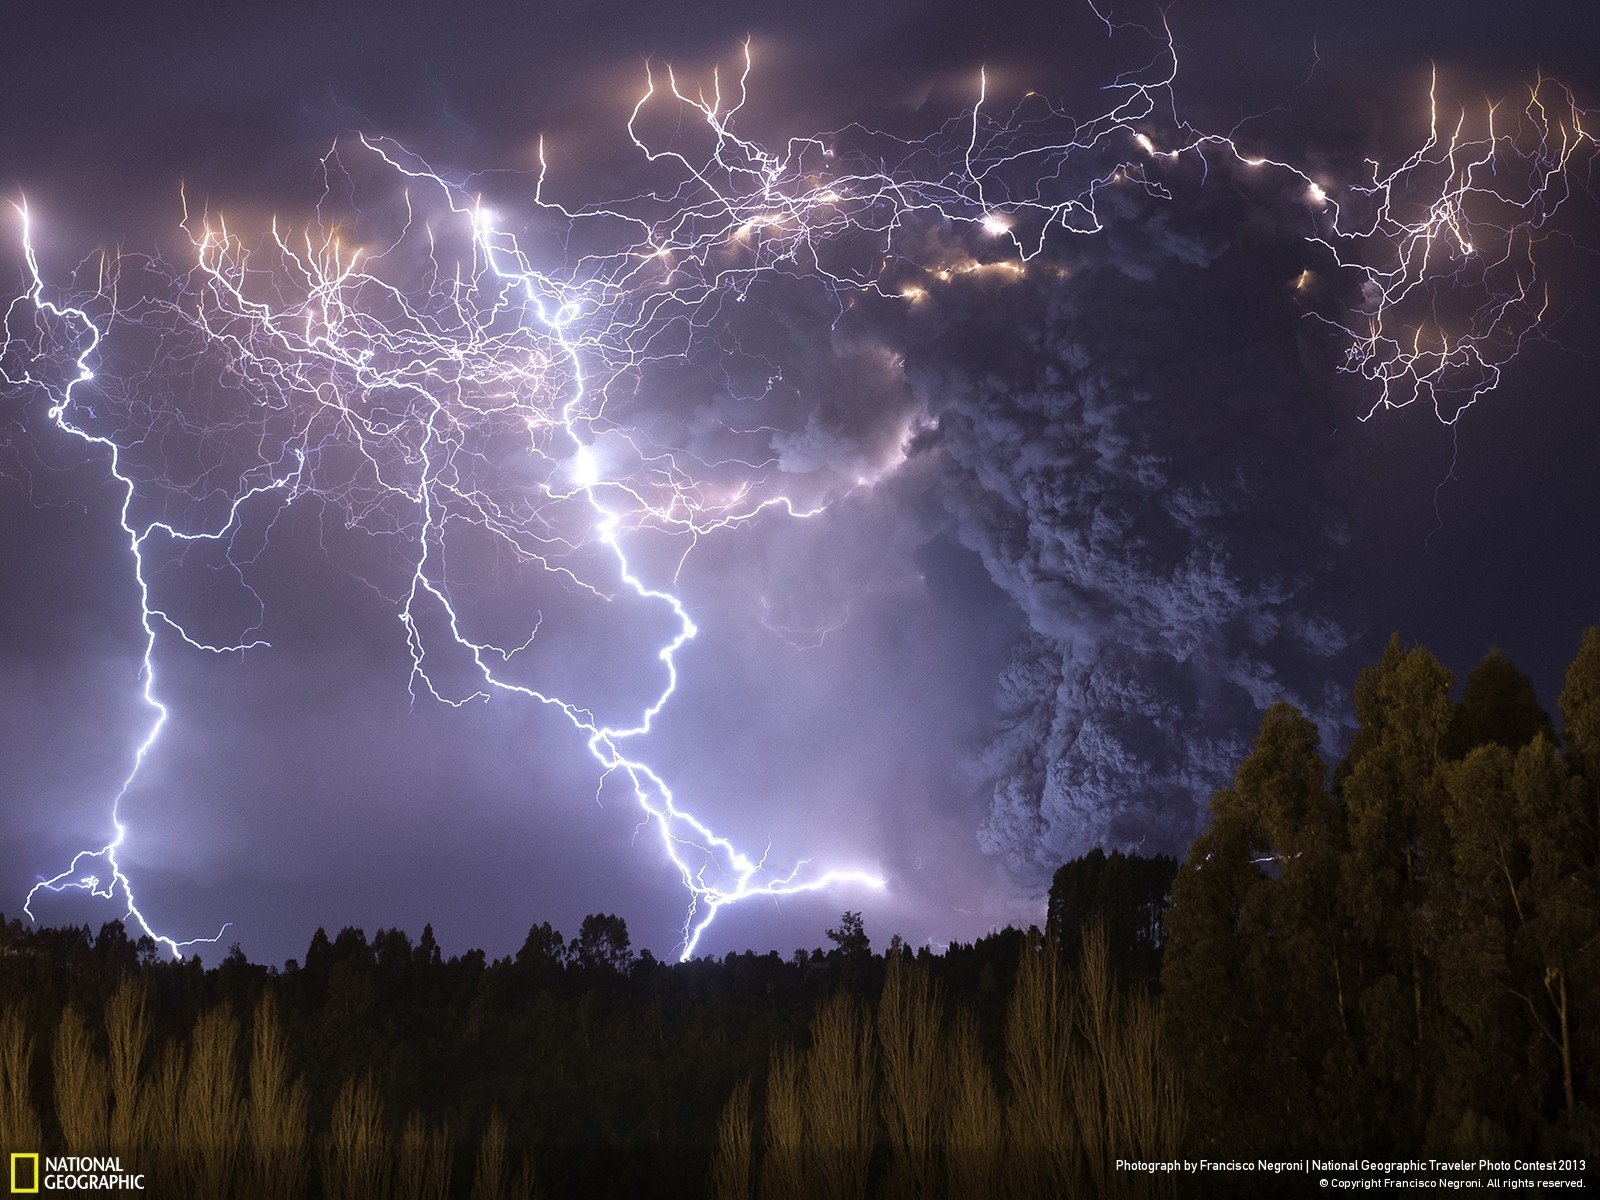 chile, Landscapes, Nature, Smoke, National, Geographic, Lightning Wallpaper